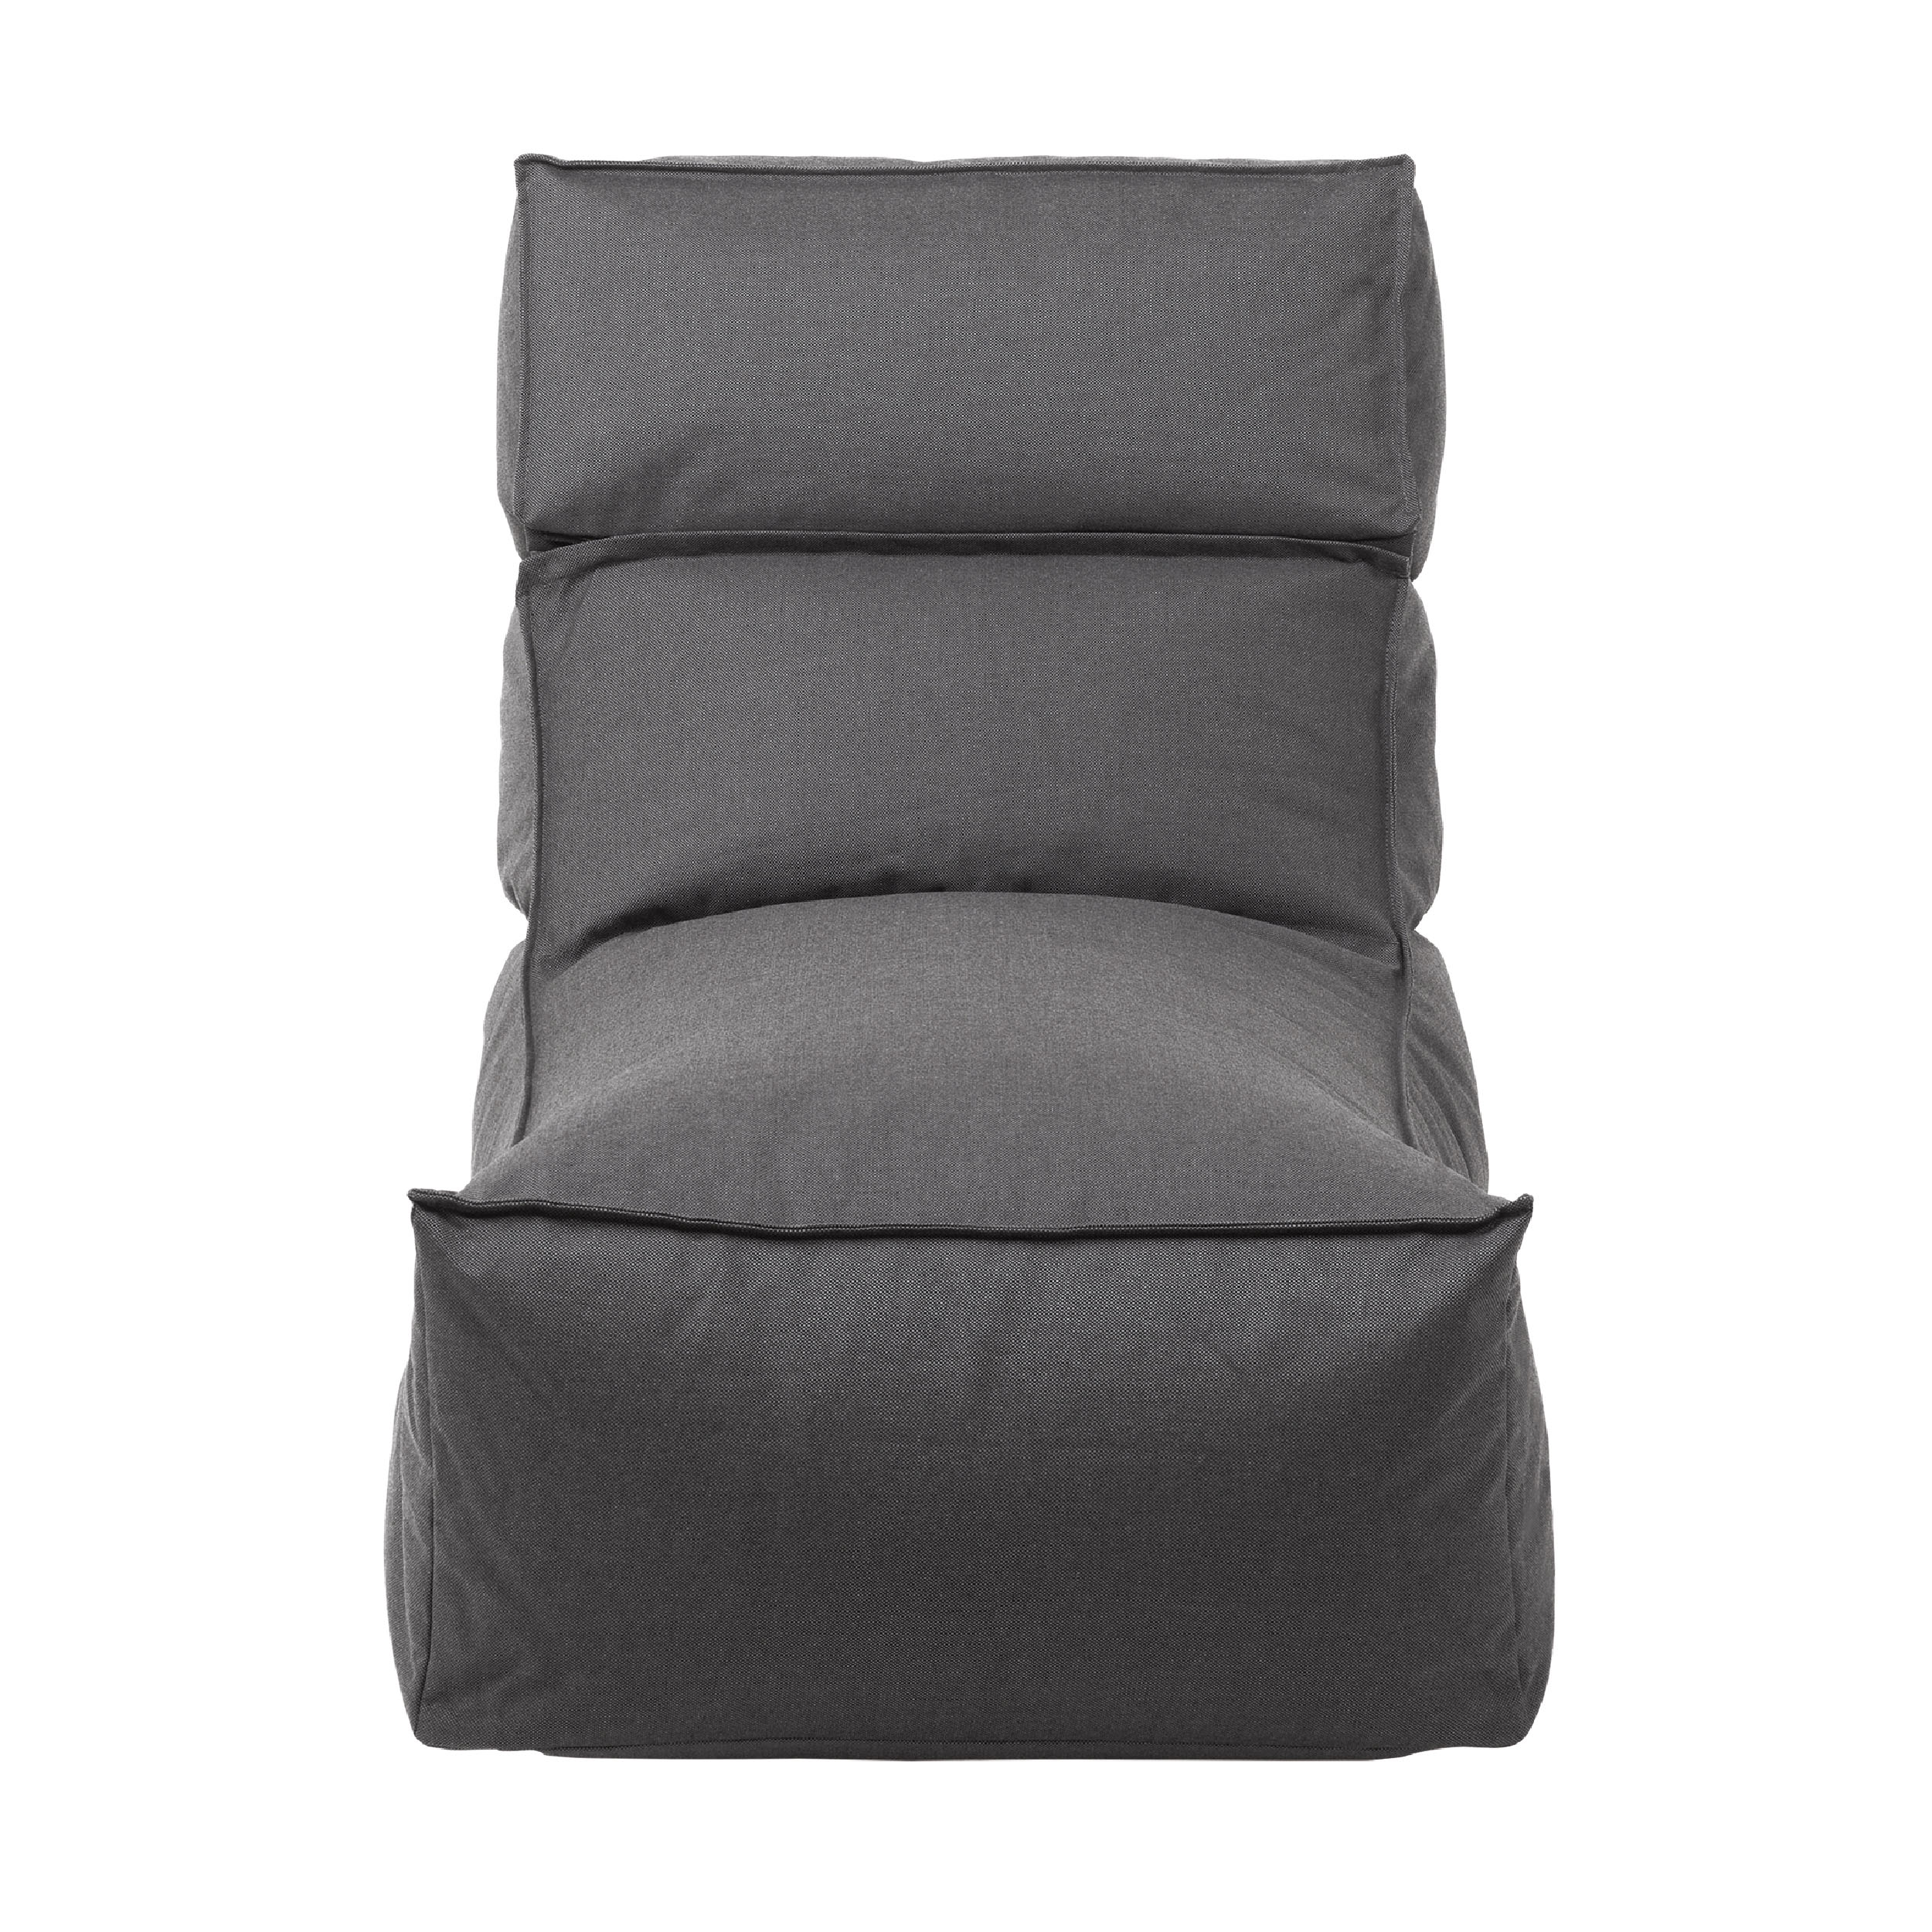 Stay Lounger Outdoor Liege